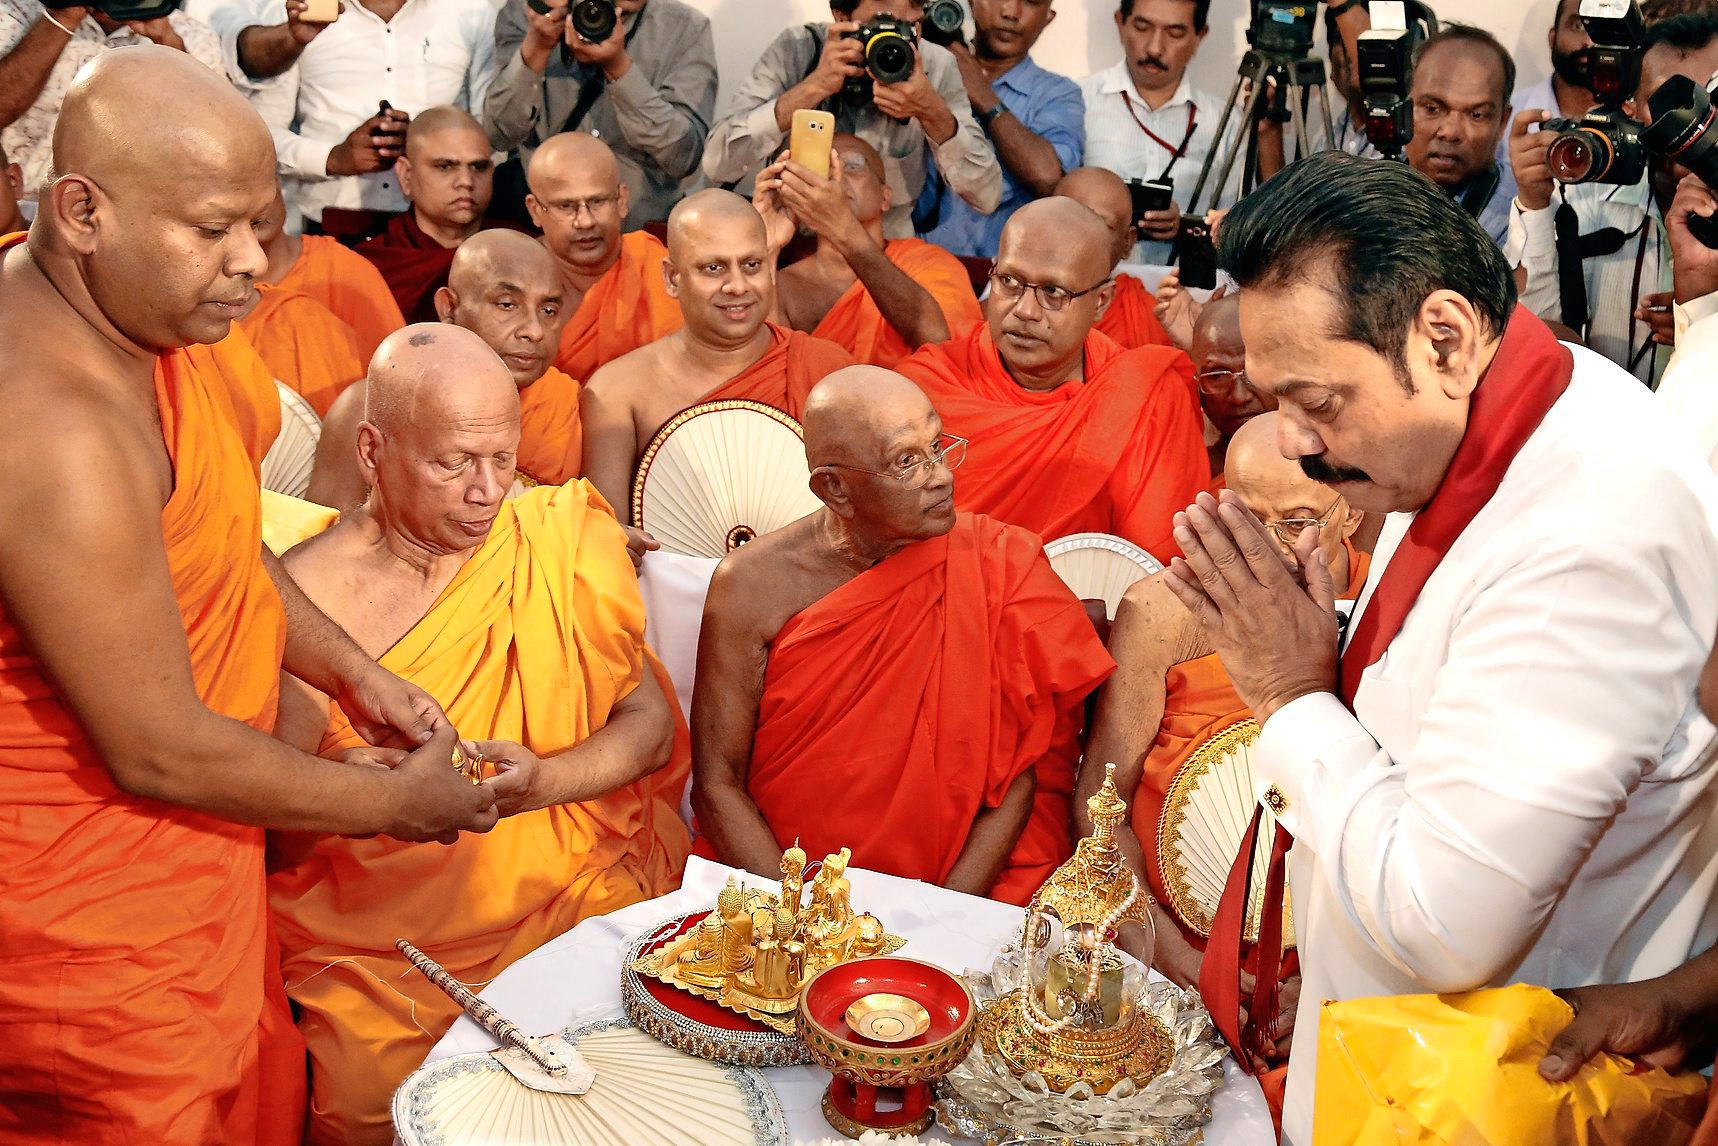 epa07128842 Former Sri Lankan President Mahinda Rajapaksa takes part in religious observances prior to assuming duties as the new Prime Minister at the Prime MinisterÄôs office in Colombo, Sri Lanka 29 October 2018. Sri Lankan President Maithripala Sirisena appointed Mahinda Rajapaksa as the new Prime Minister after removing Ranil Wickremesinghe from the post on Friday night. Even as the newly appointed former President and incumbent Kurunegala District Member of Parliament officially assumed duties, the former Premier Ranil Wickremesinghe still claims that he is legally the Prime Minister and refuses to leave the official Prime Ministerial residence ÄòTemple TreesÄô.  EPA/M.A.PUSHPA KUMARA SRI LANKA POLITICS